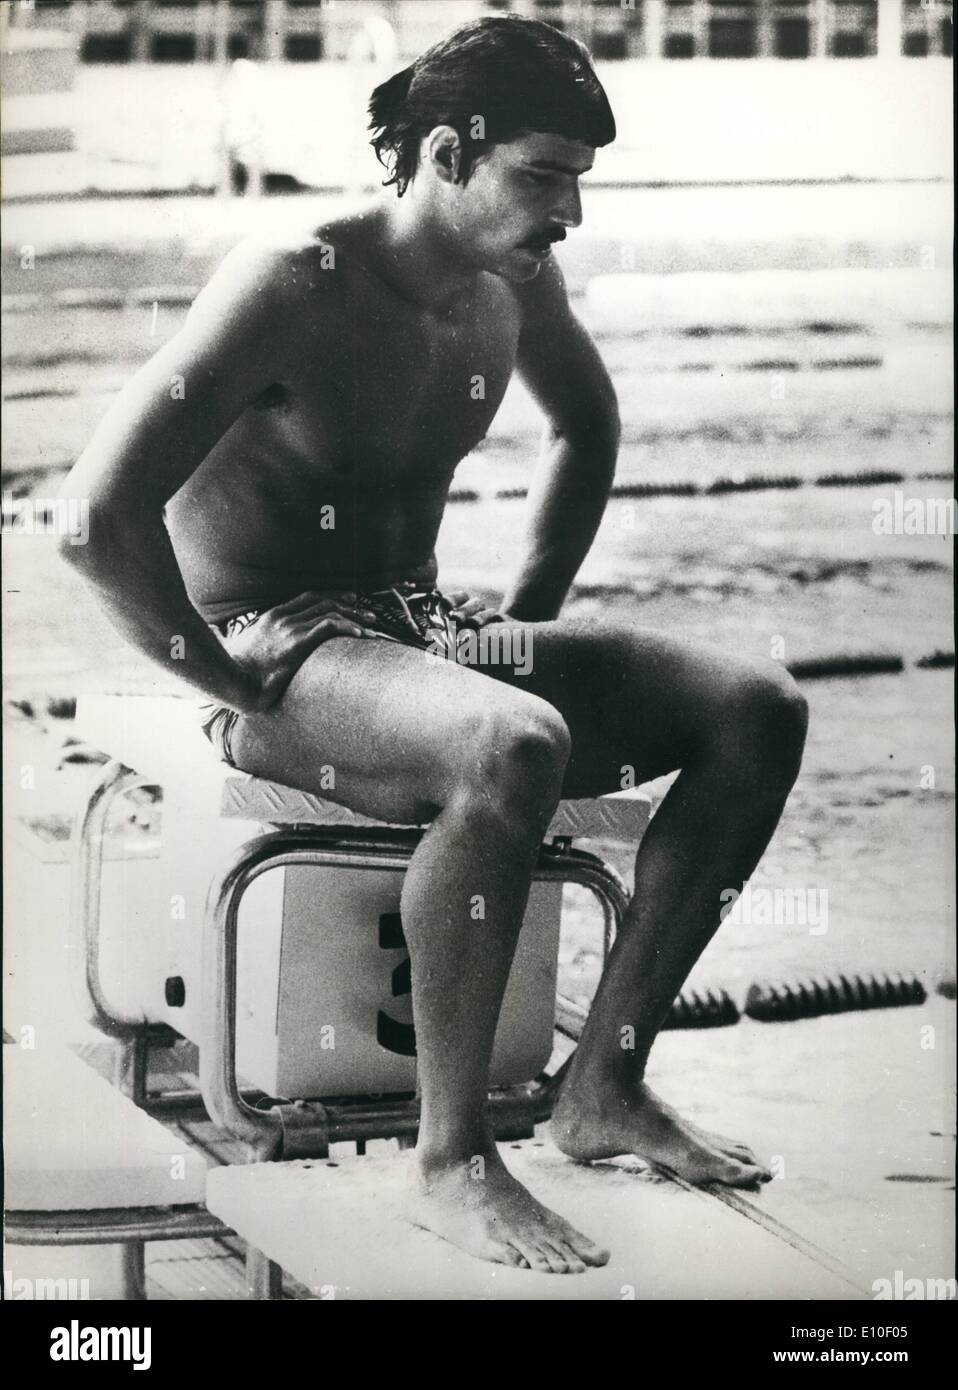 Sep. 09, 1972 - Study Of A Champion: Reminiscent of Rodin's statue of The Thinker - Mark Spitz, the American swimmer, in a thoughtful mood after winning his 5th Gold Medal at the Olympic Games in Munich. Stock Photo